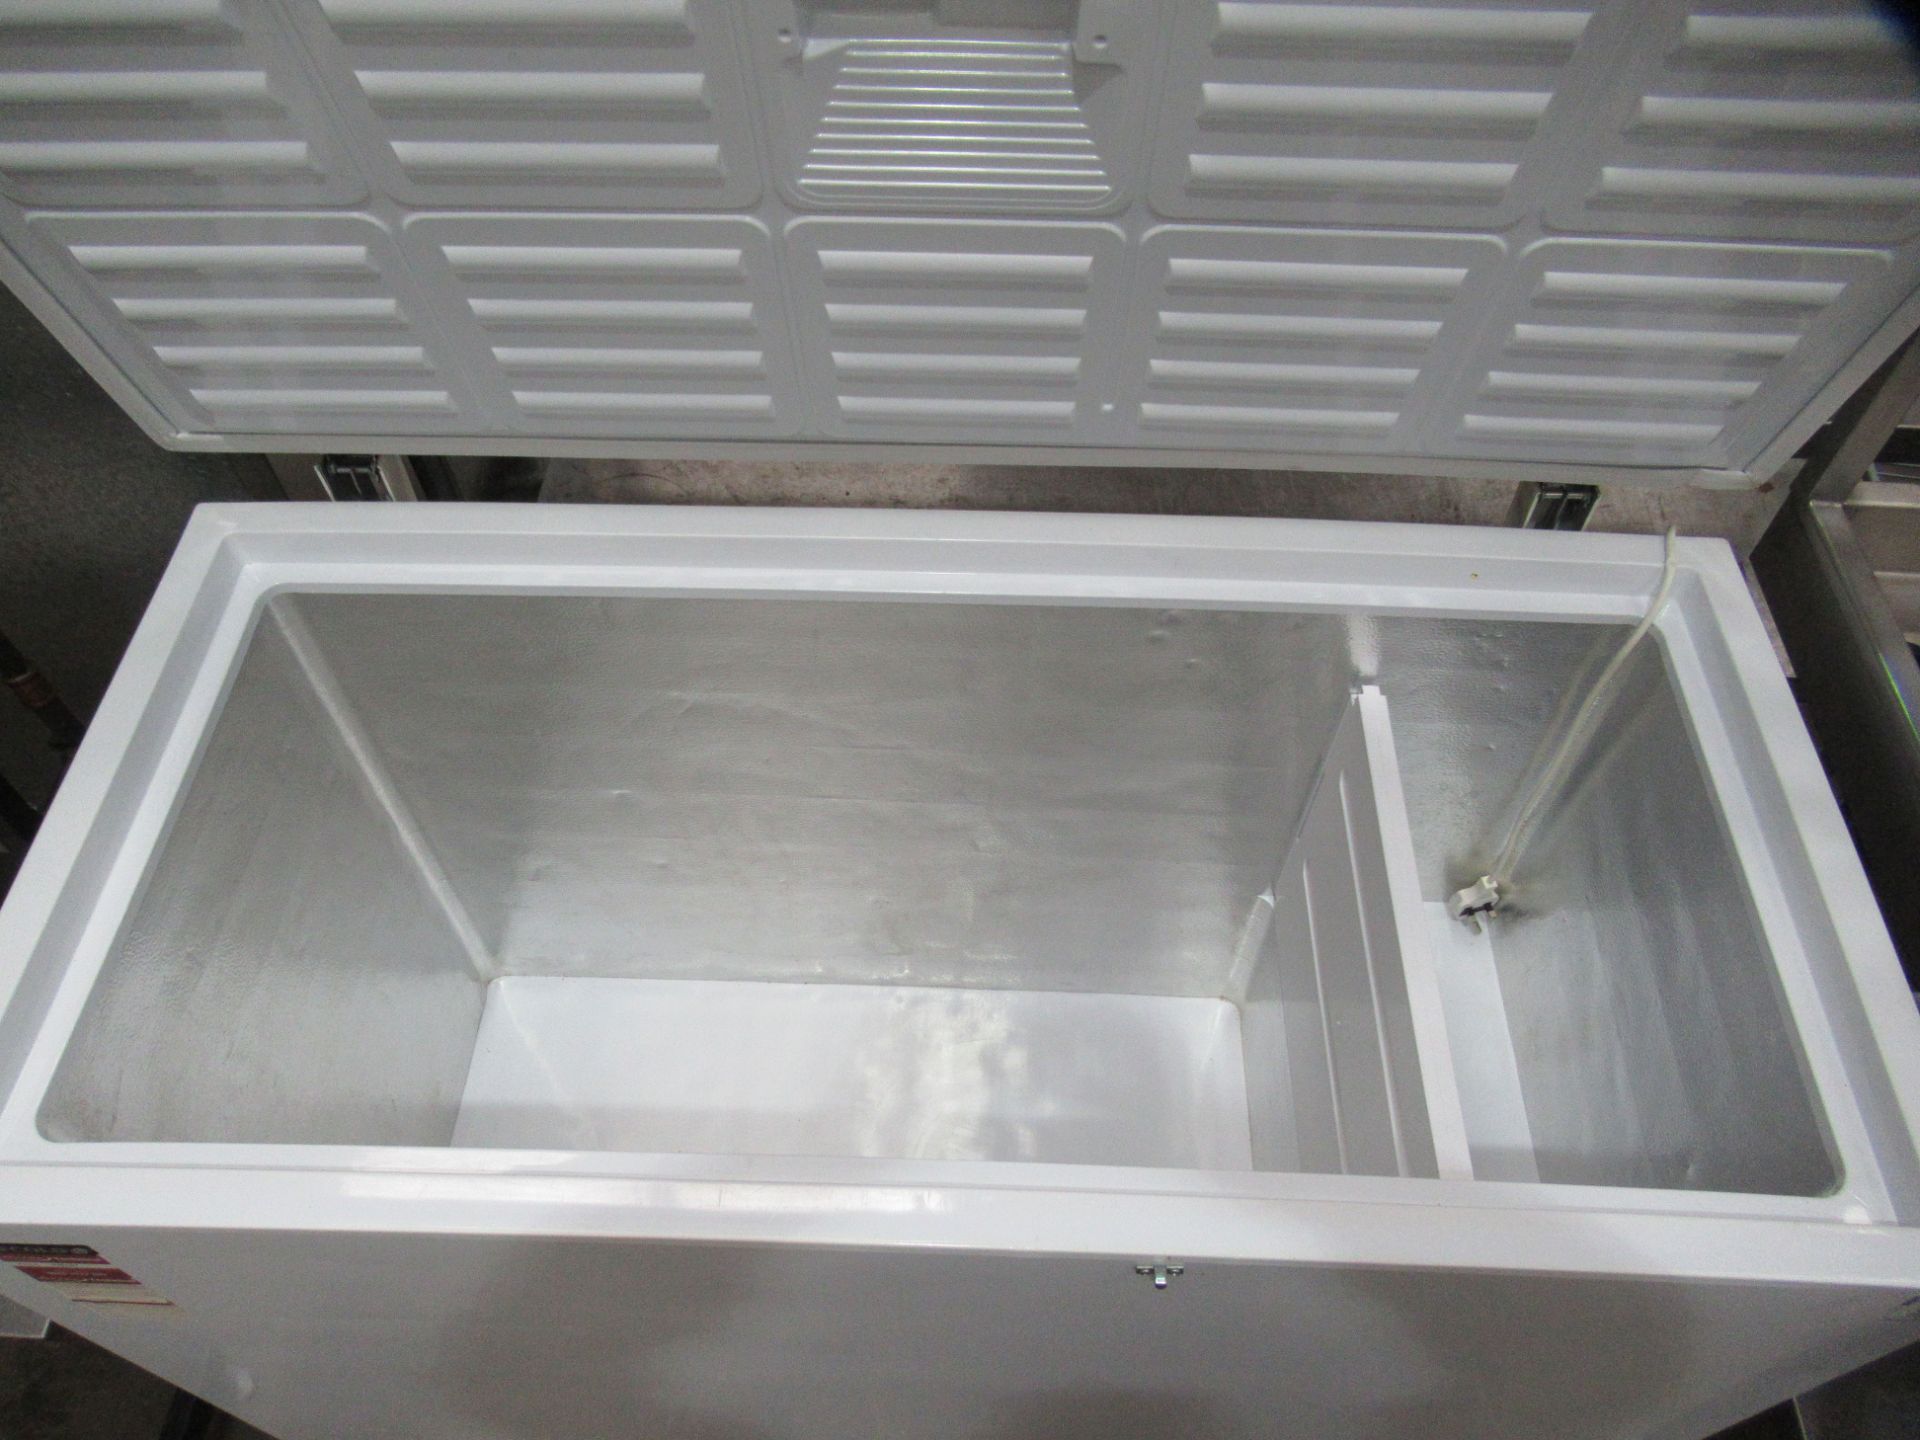 Tefcold Chest Freezer (1290 x 600 x 920mm) - Image 2 of 2